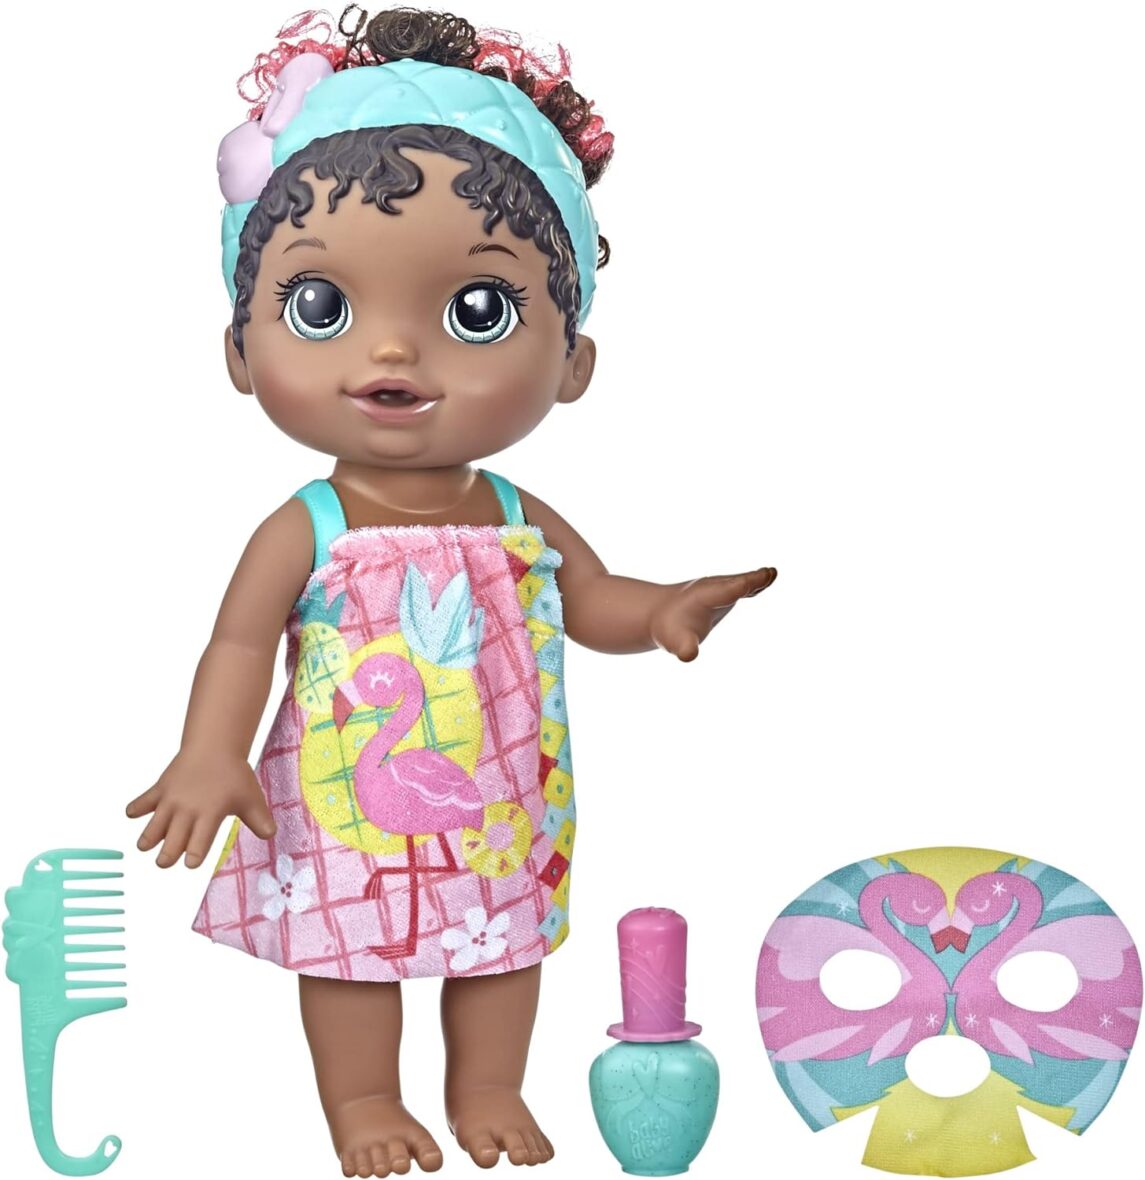 Baby Alive Glam Spa Baby Doll, Flamingo, Makeup Toy for Kids 3 and Up, Color Reveal Mani-Pedi and Makeup, 12.4-Inch Waterplay Doll, Black Hair